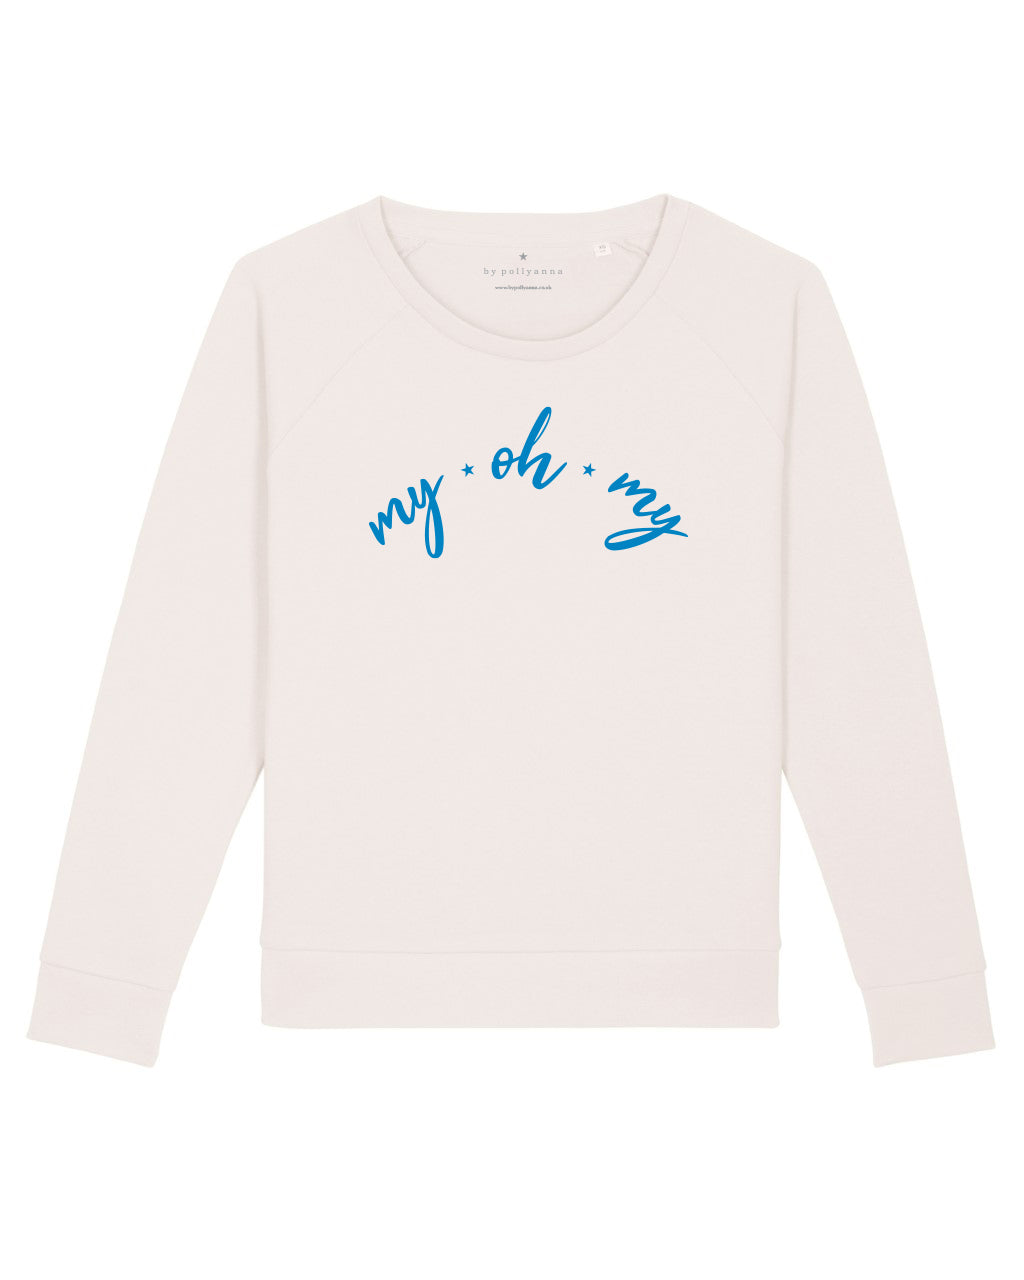 🦋 Vintage White My Oh My Sweatshirt - RELAXED FIT - MADE TO ORDER